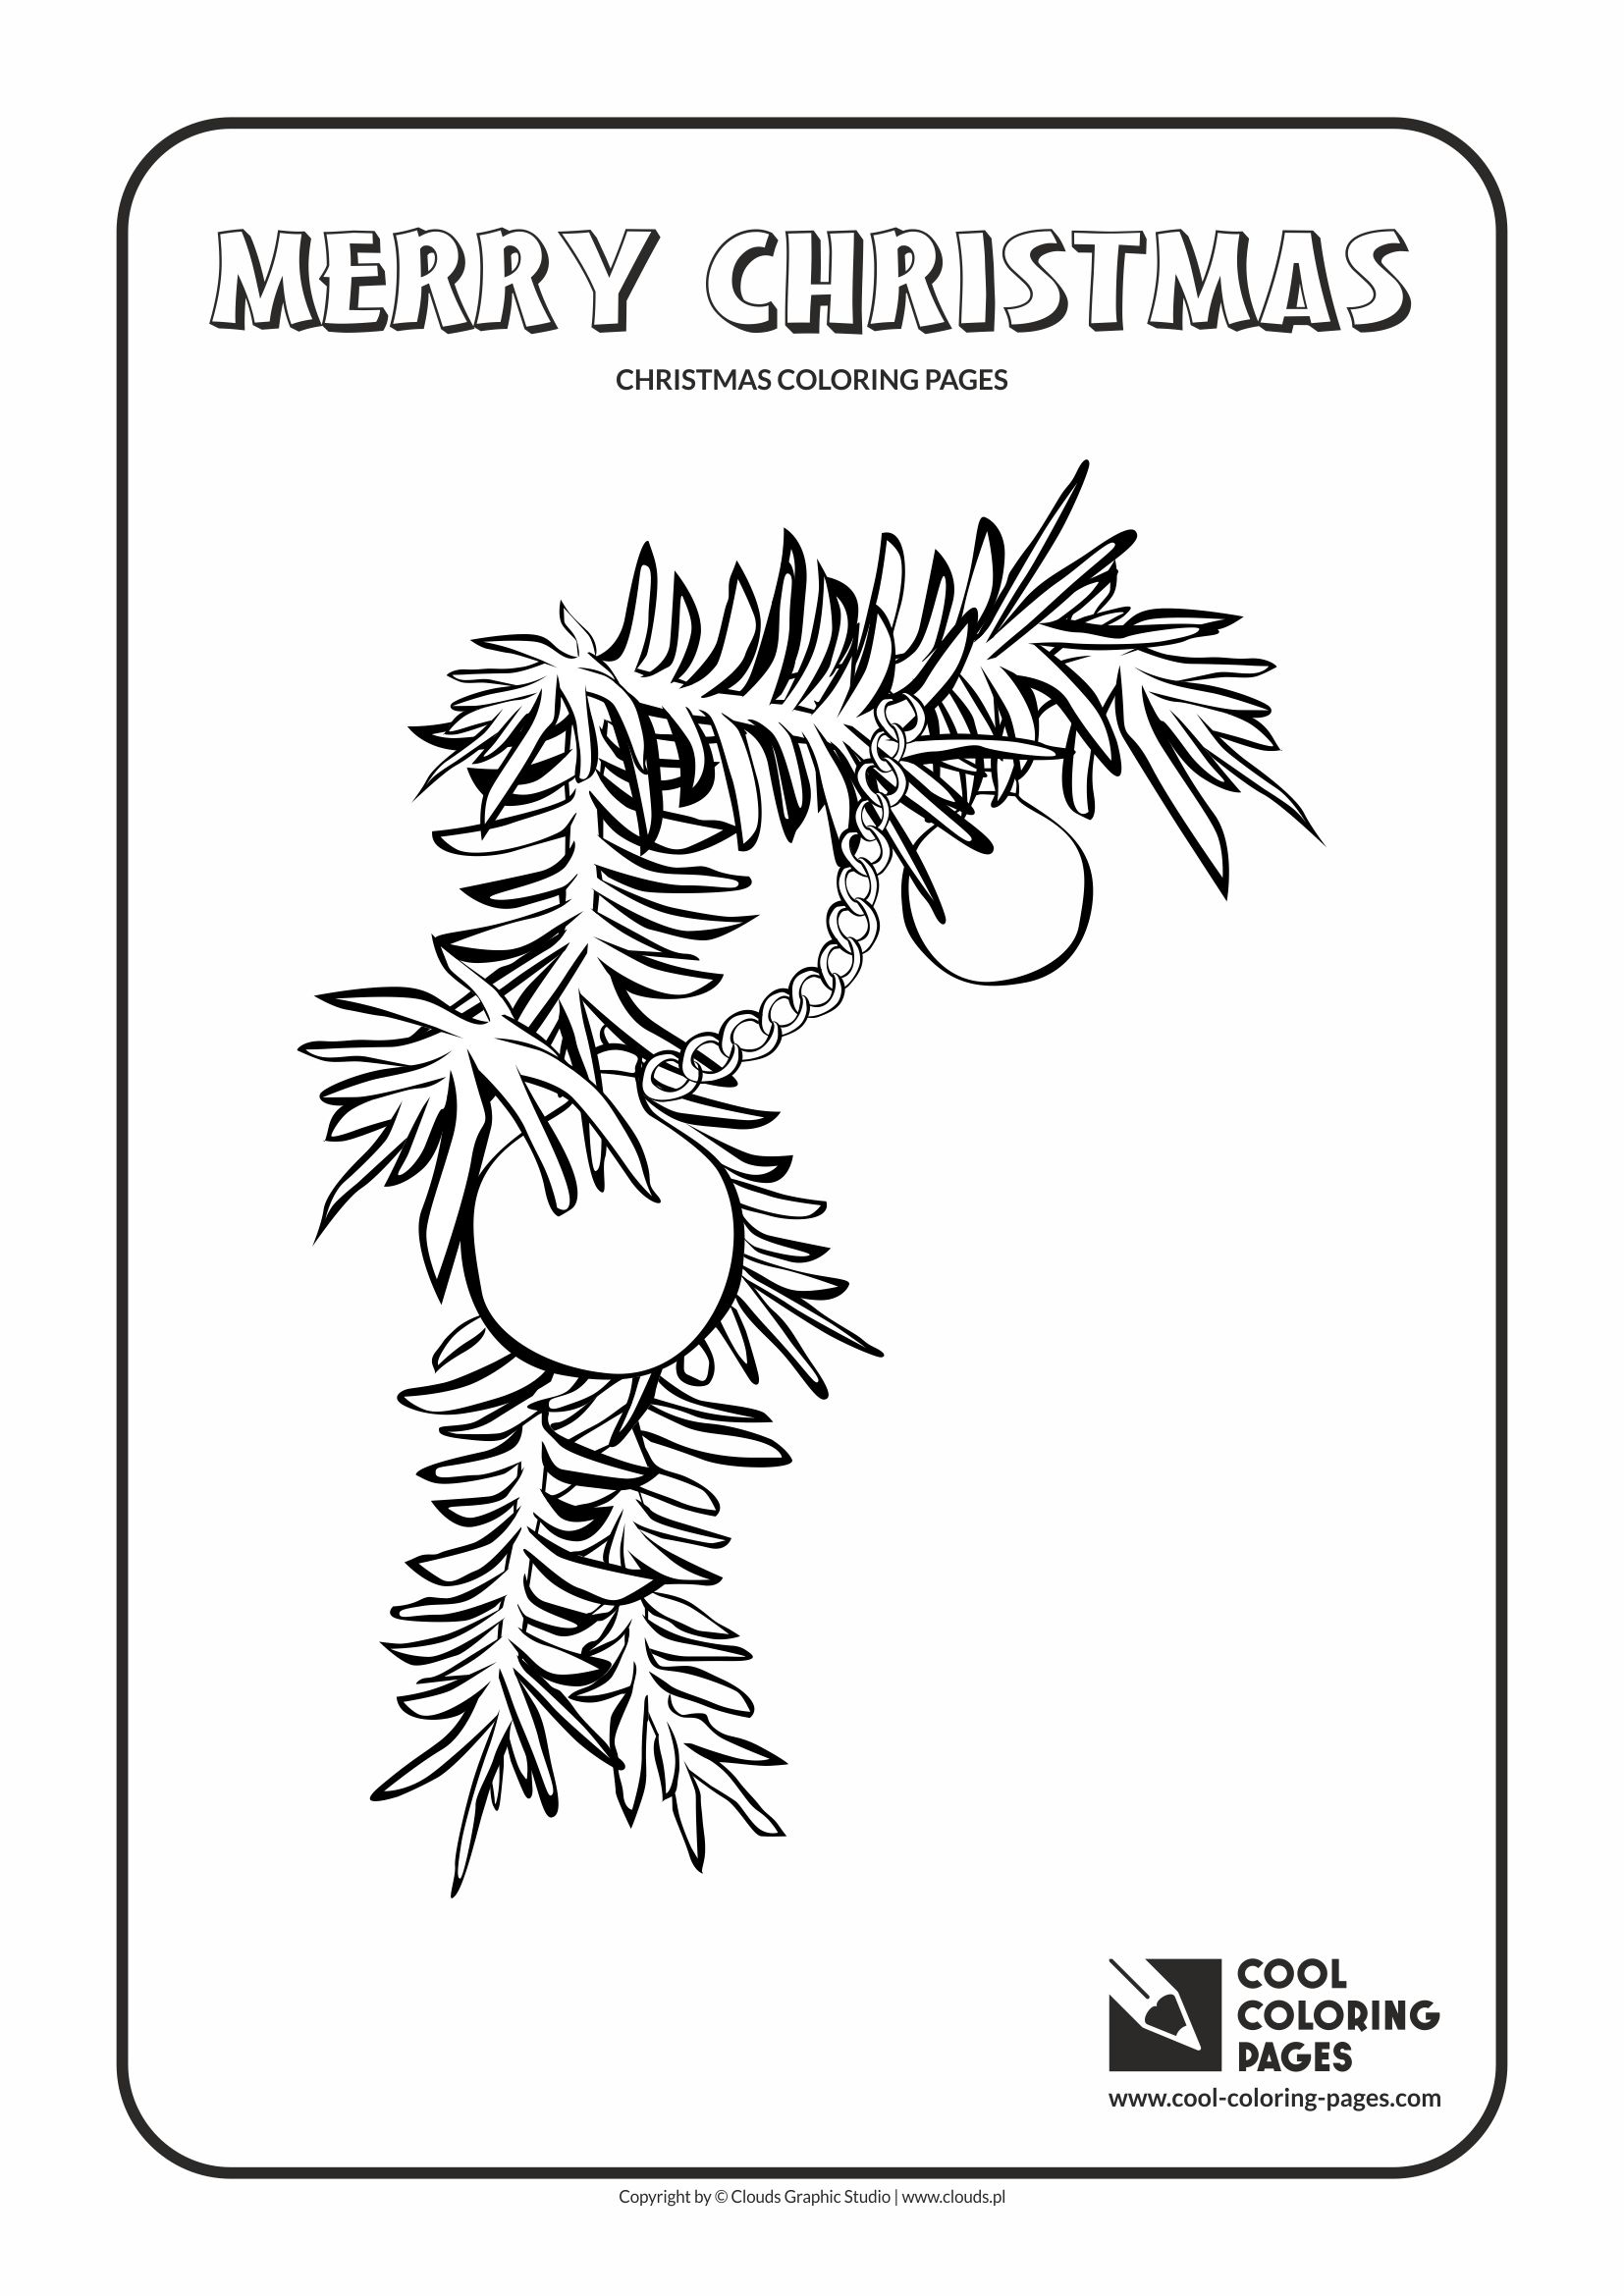 Cool Coloring Pages Christmas coloring pages - Cool Coloring Pages